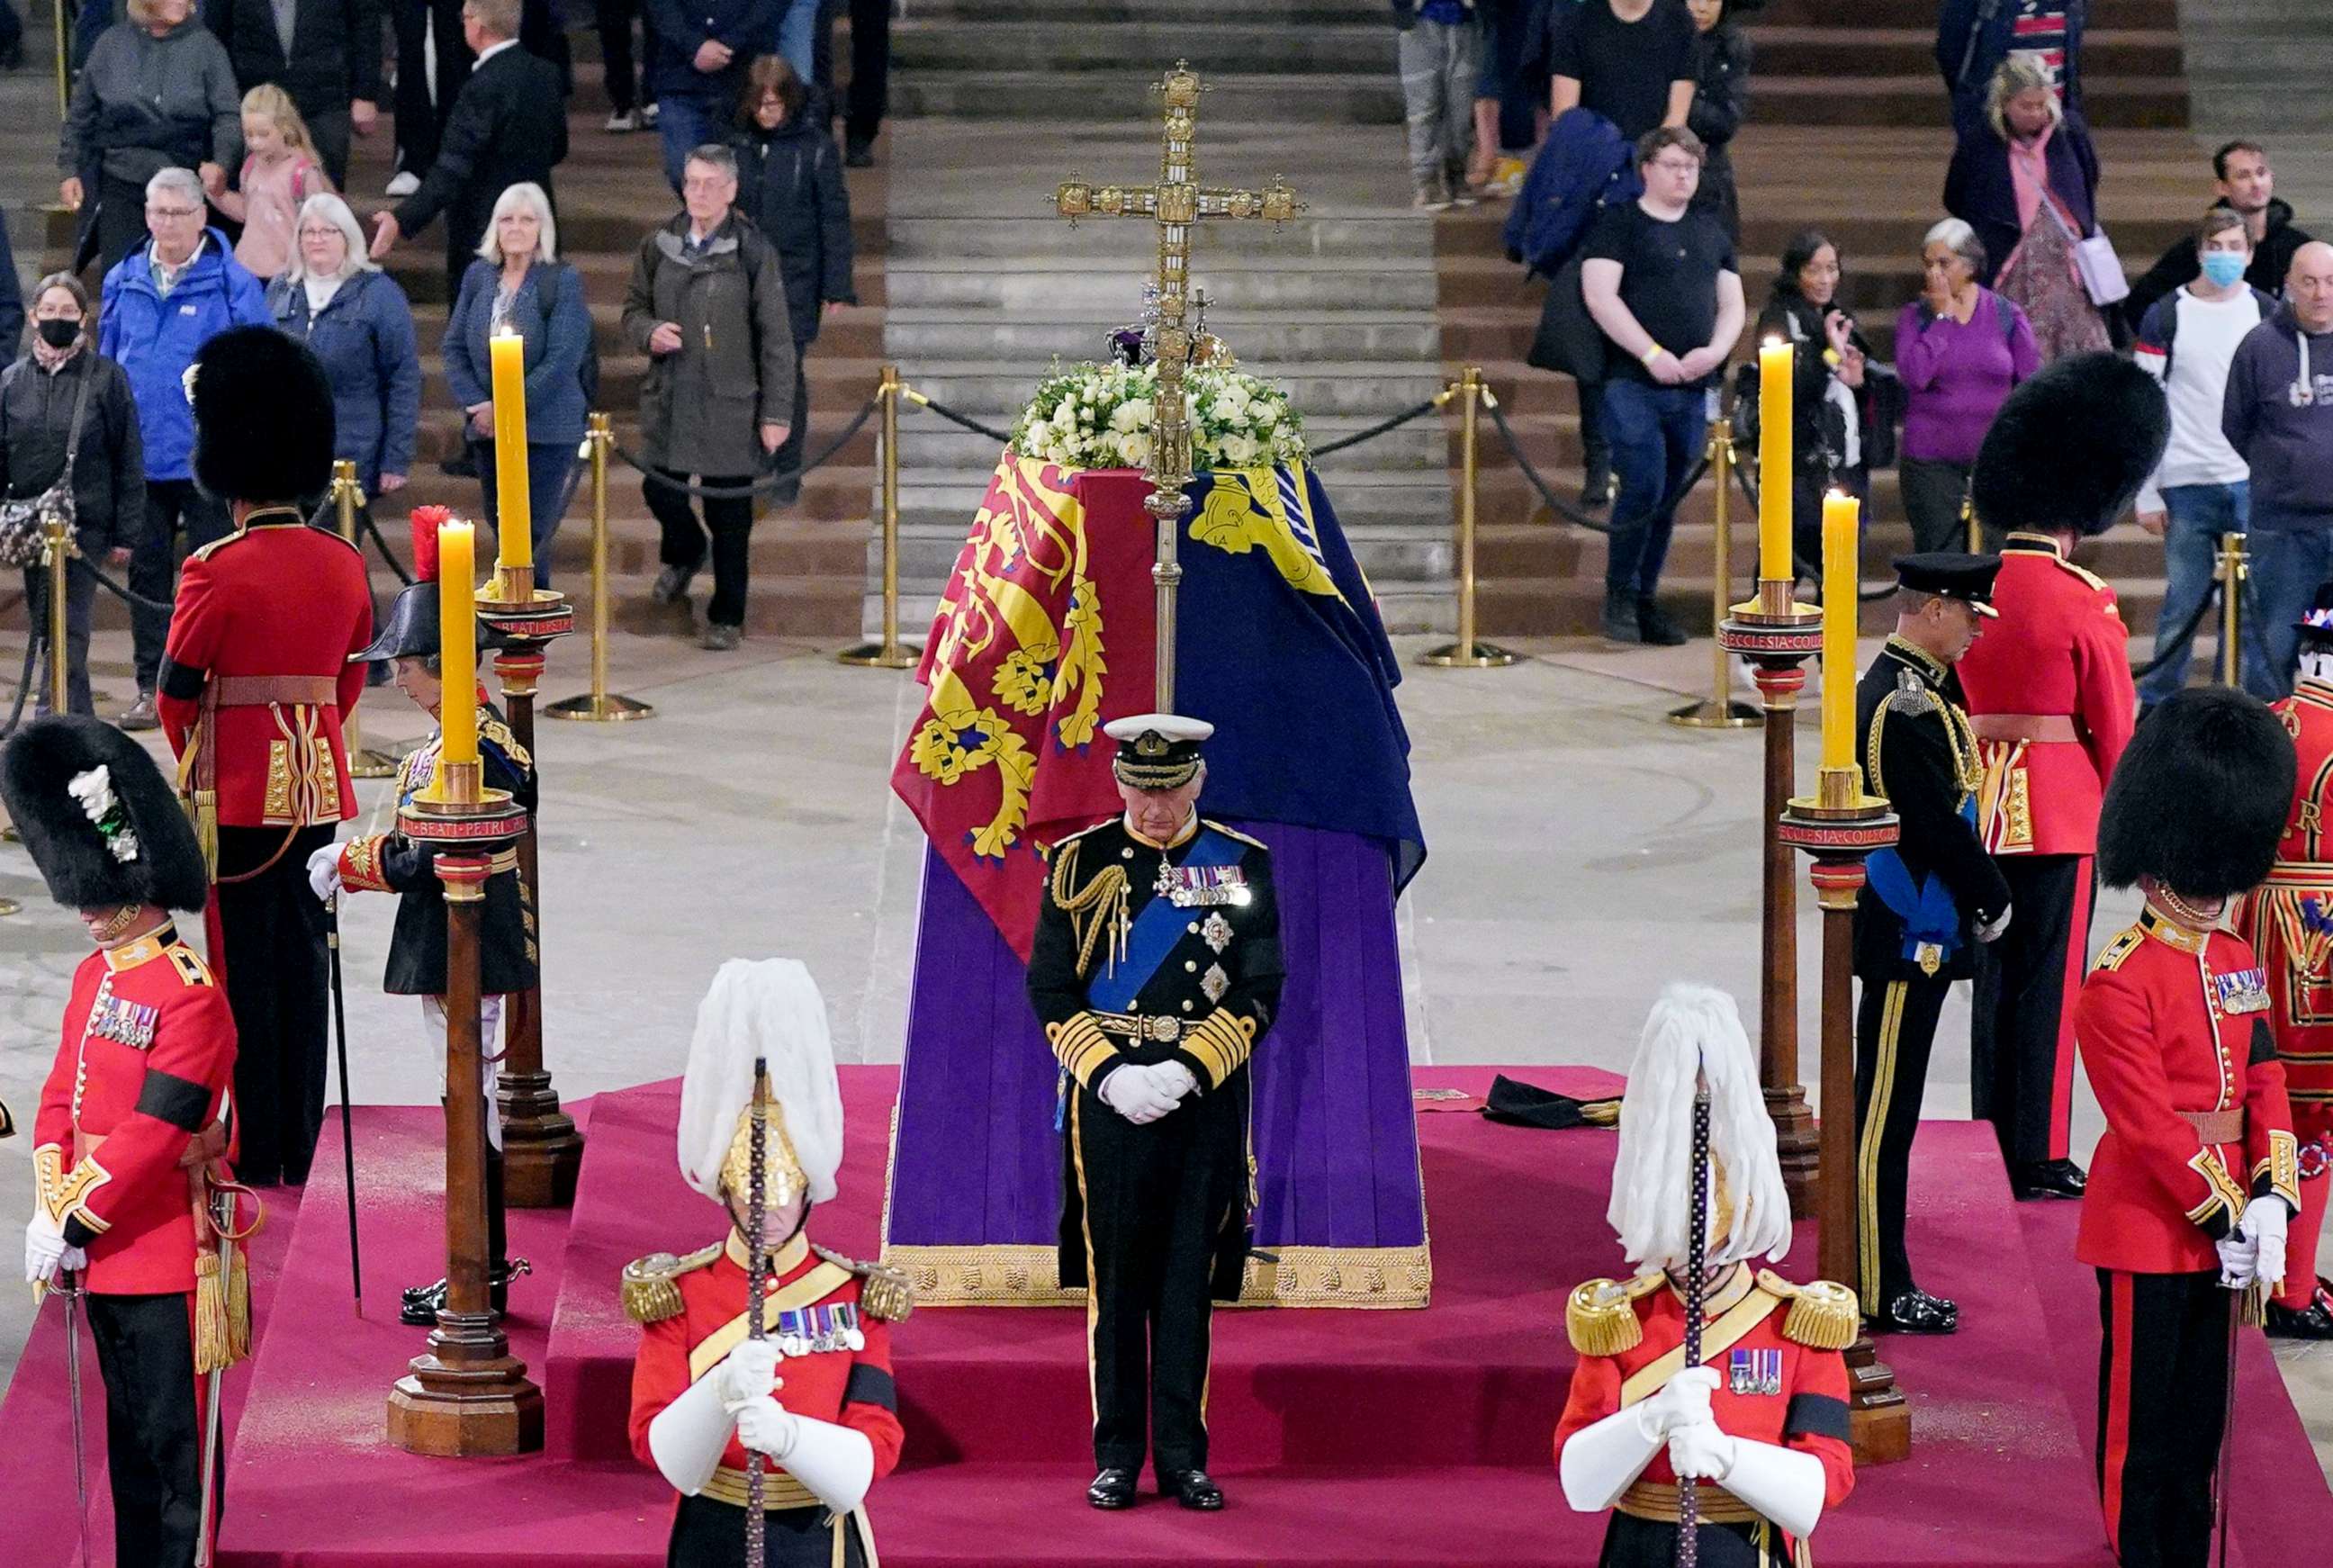 PHOTO: King Charles III attends a vigil around the coffin of Queen Elizabeth II, lying in state on the catafalque in Westminster Hall, at the Palace of Westminster in London on September 16, 2022.